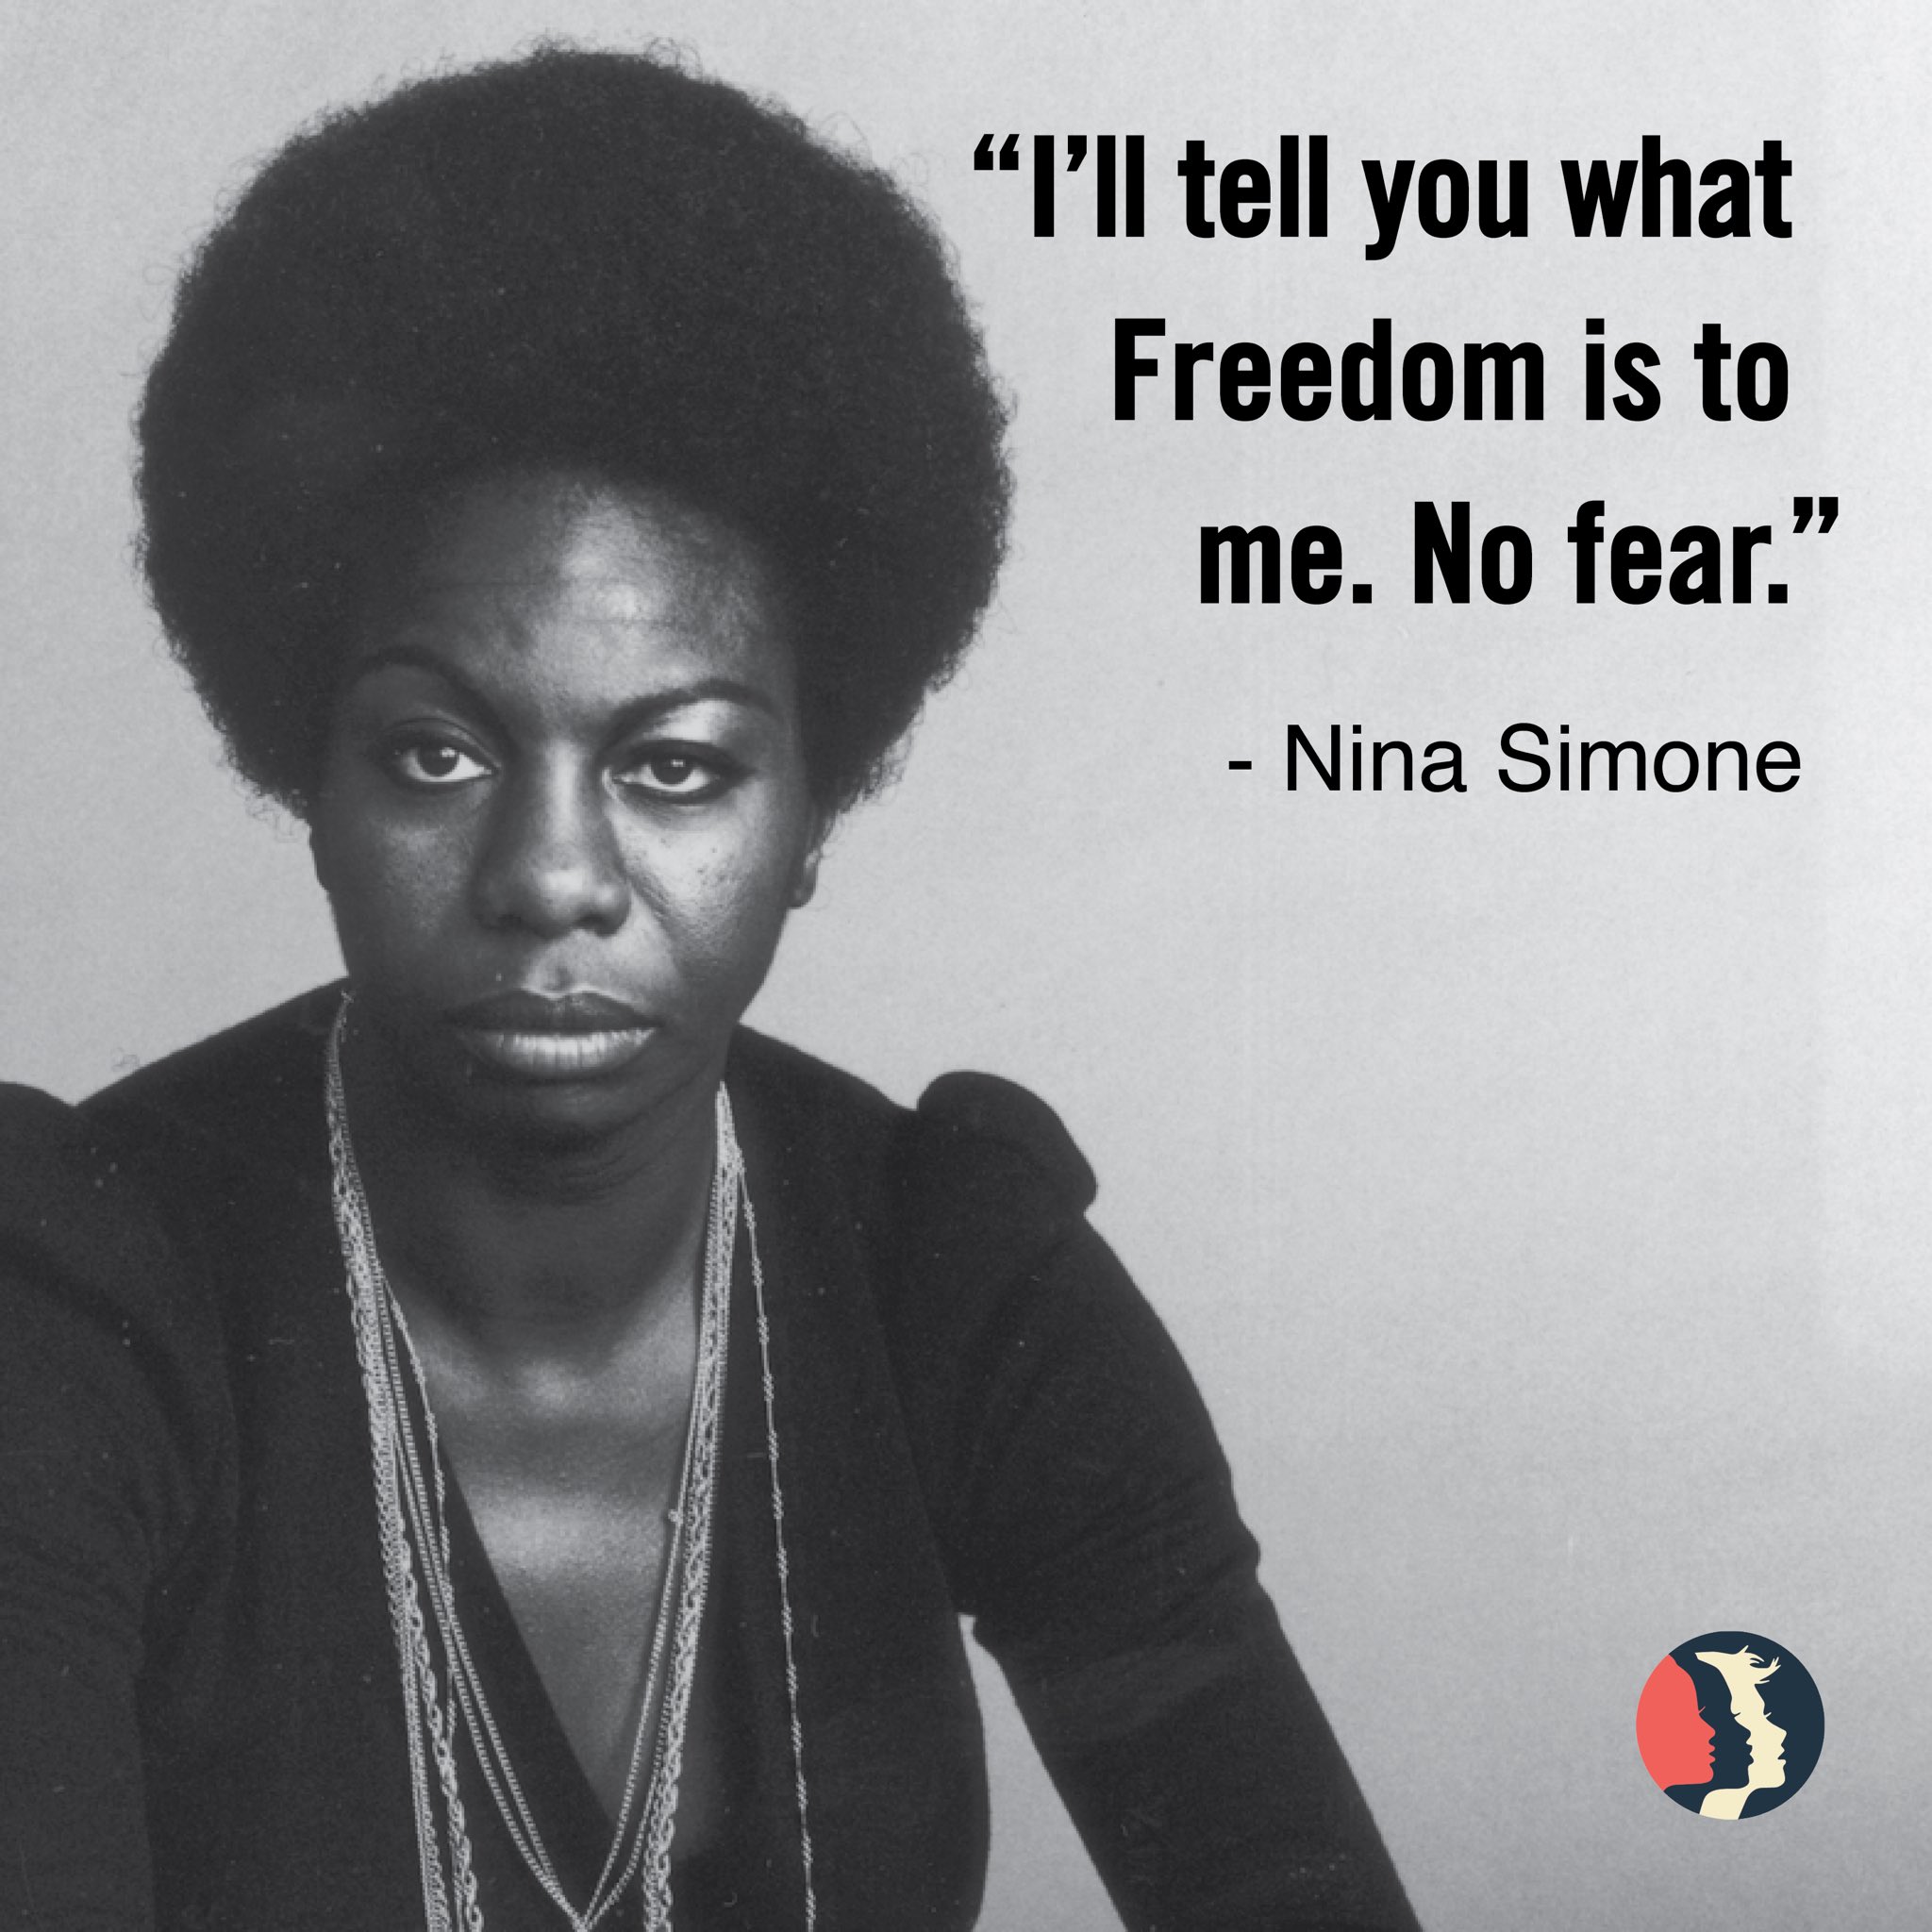 Happy birthday Nina Simone! The music icon and revolutionary was born on this day in 1933. 